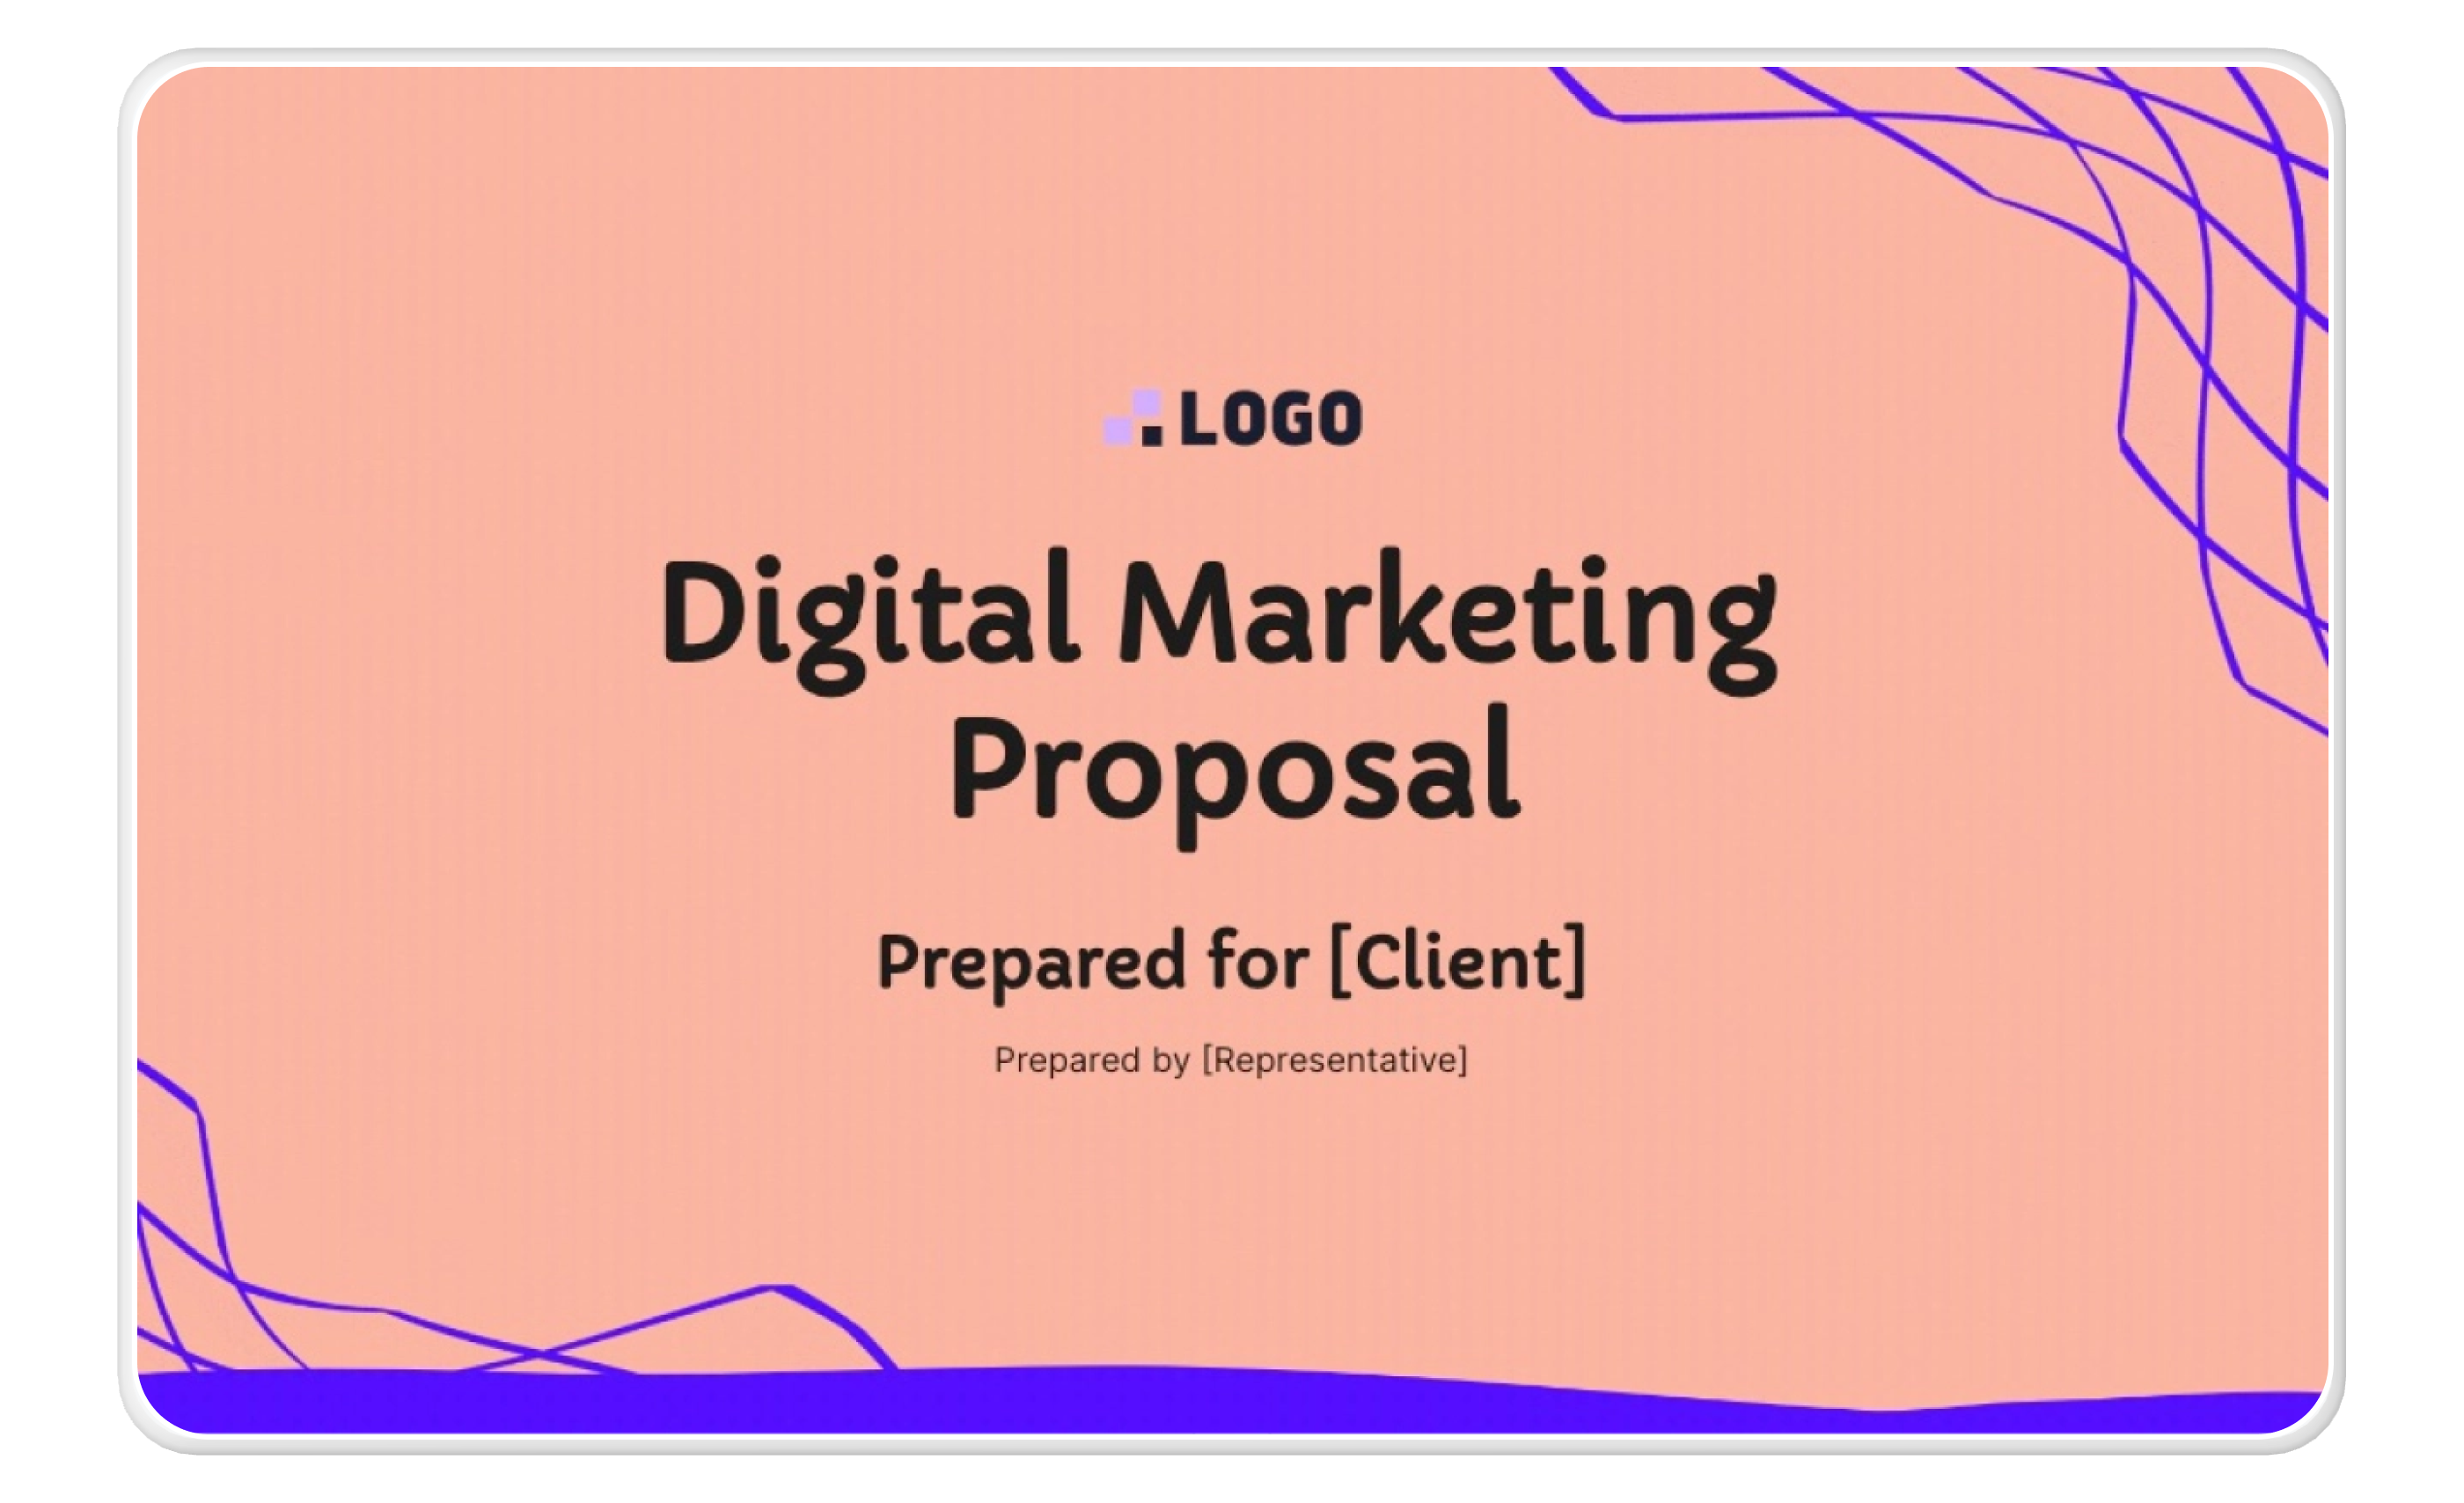 a digital marketing proposal prepared for a client